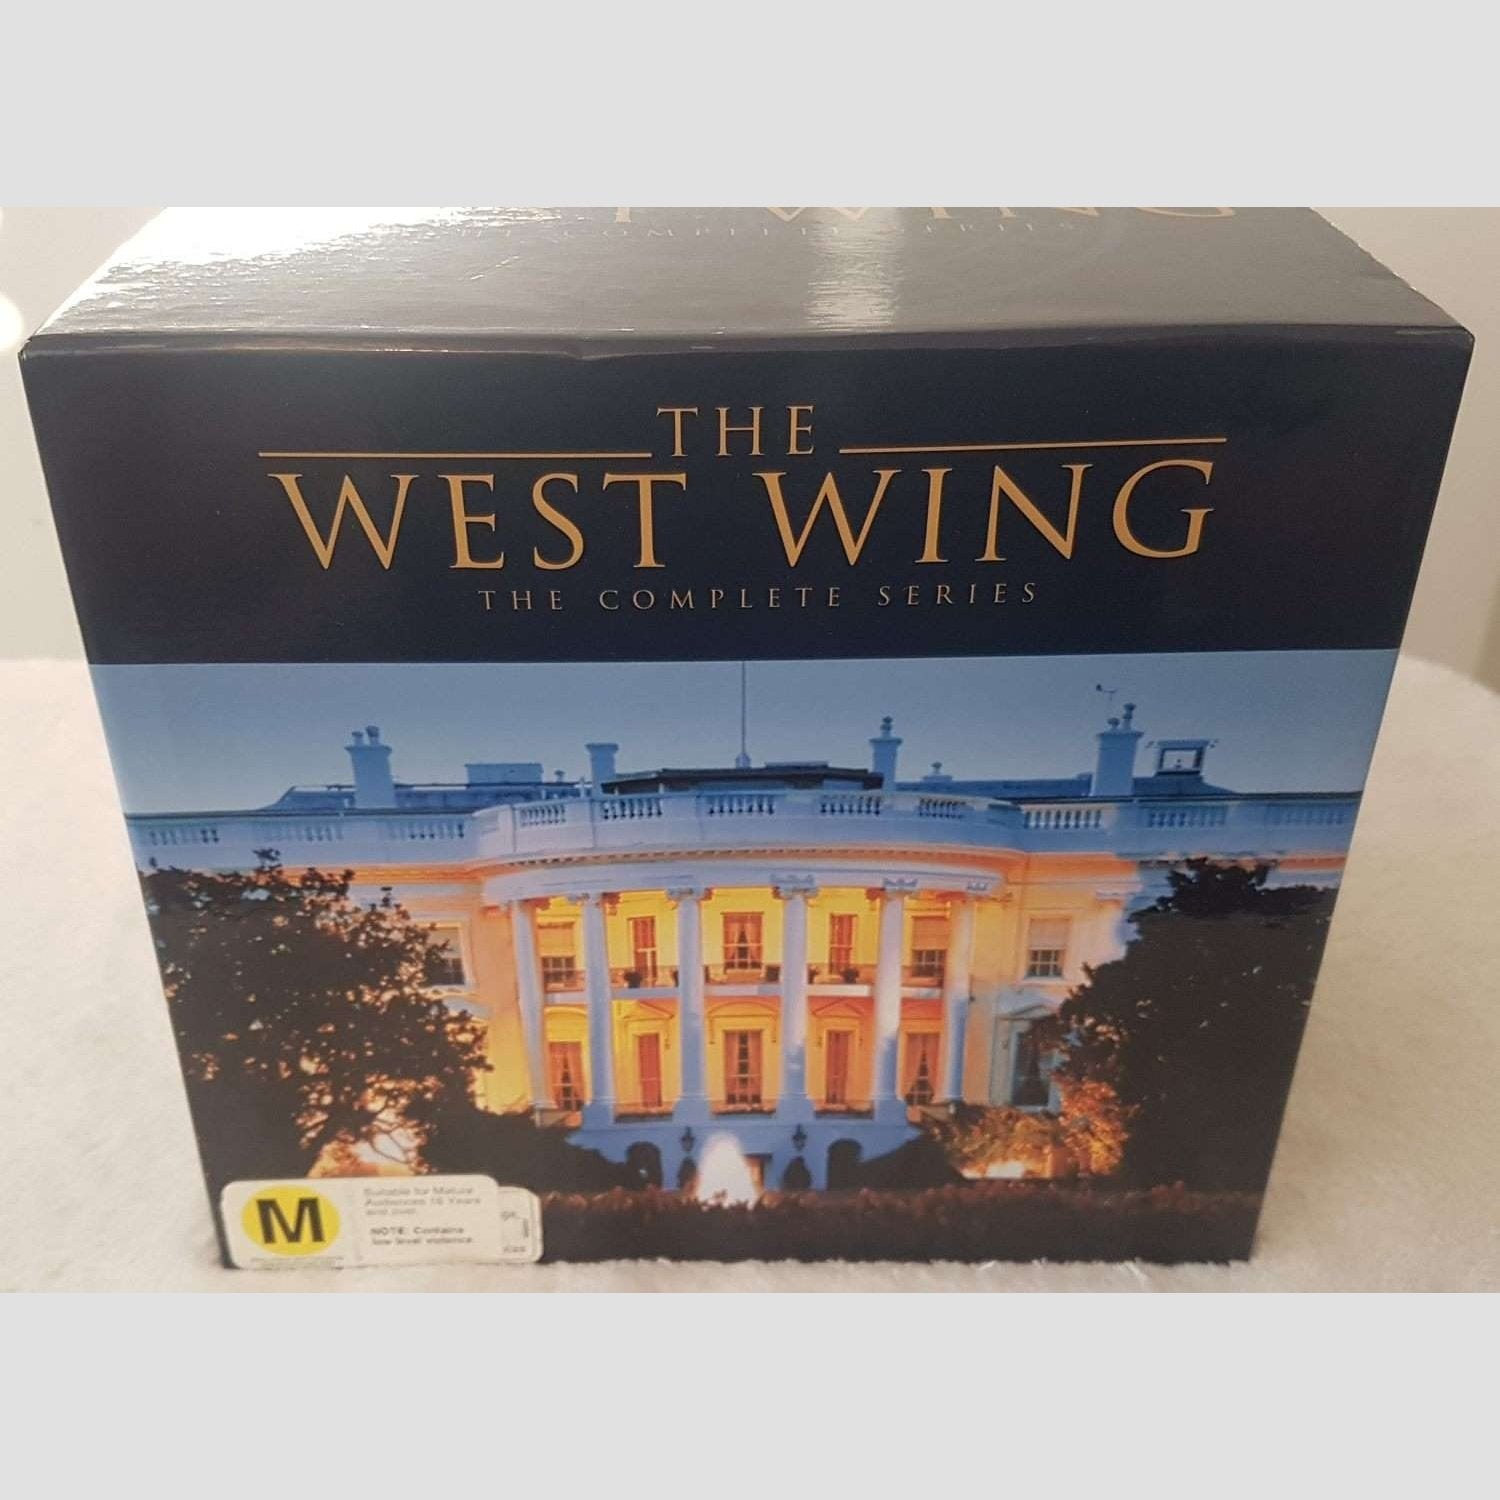 The West Wing: The Complete Series